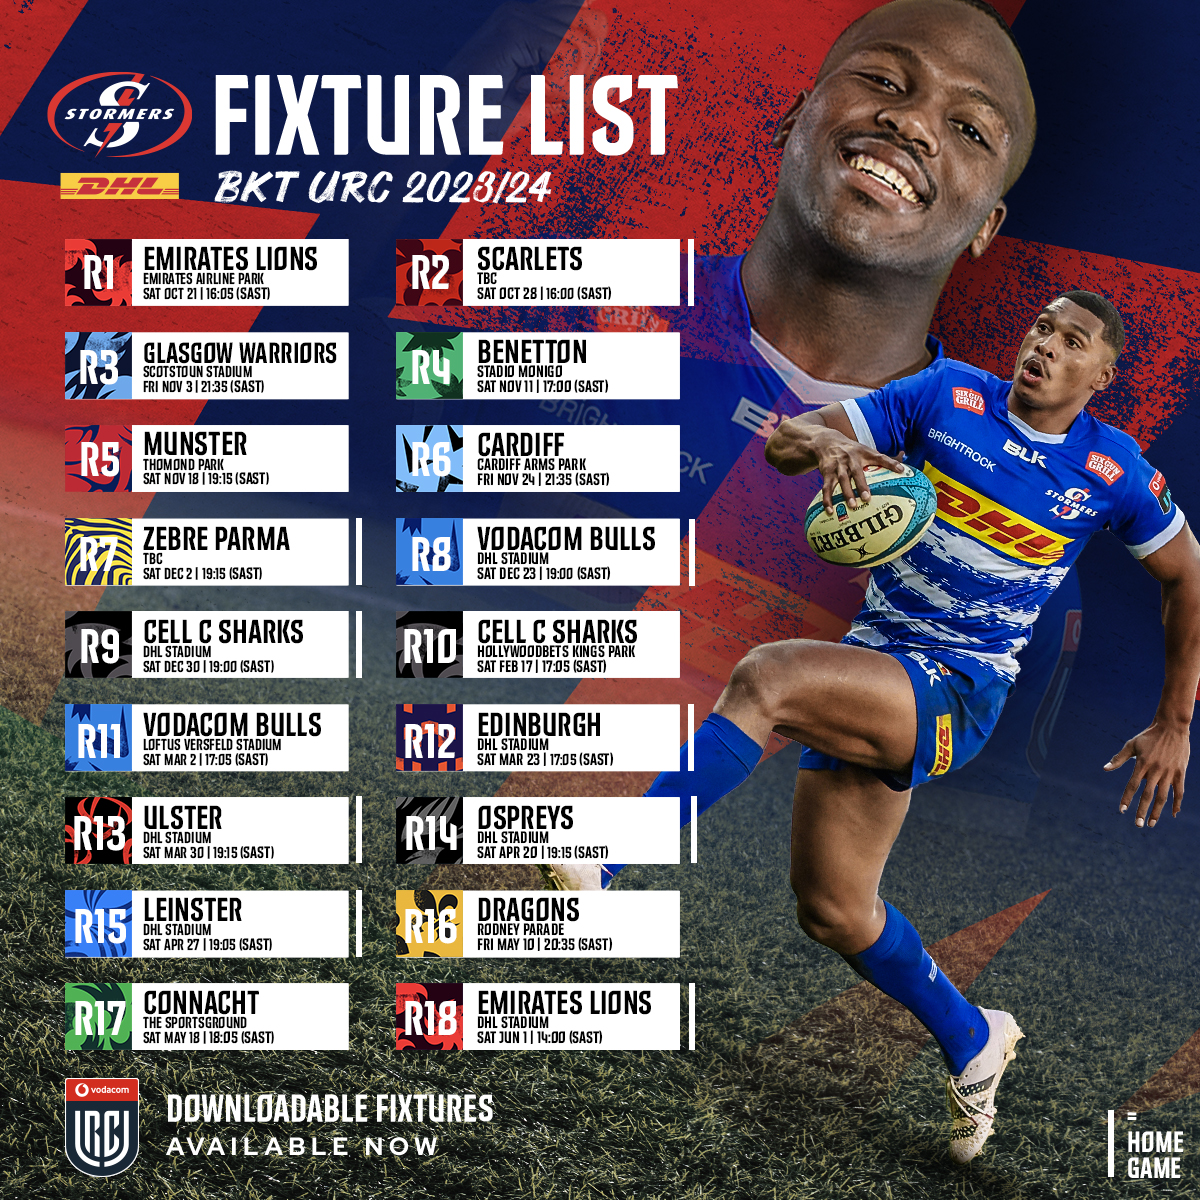 The Best Urc Rugby Fixtures 2023